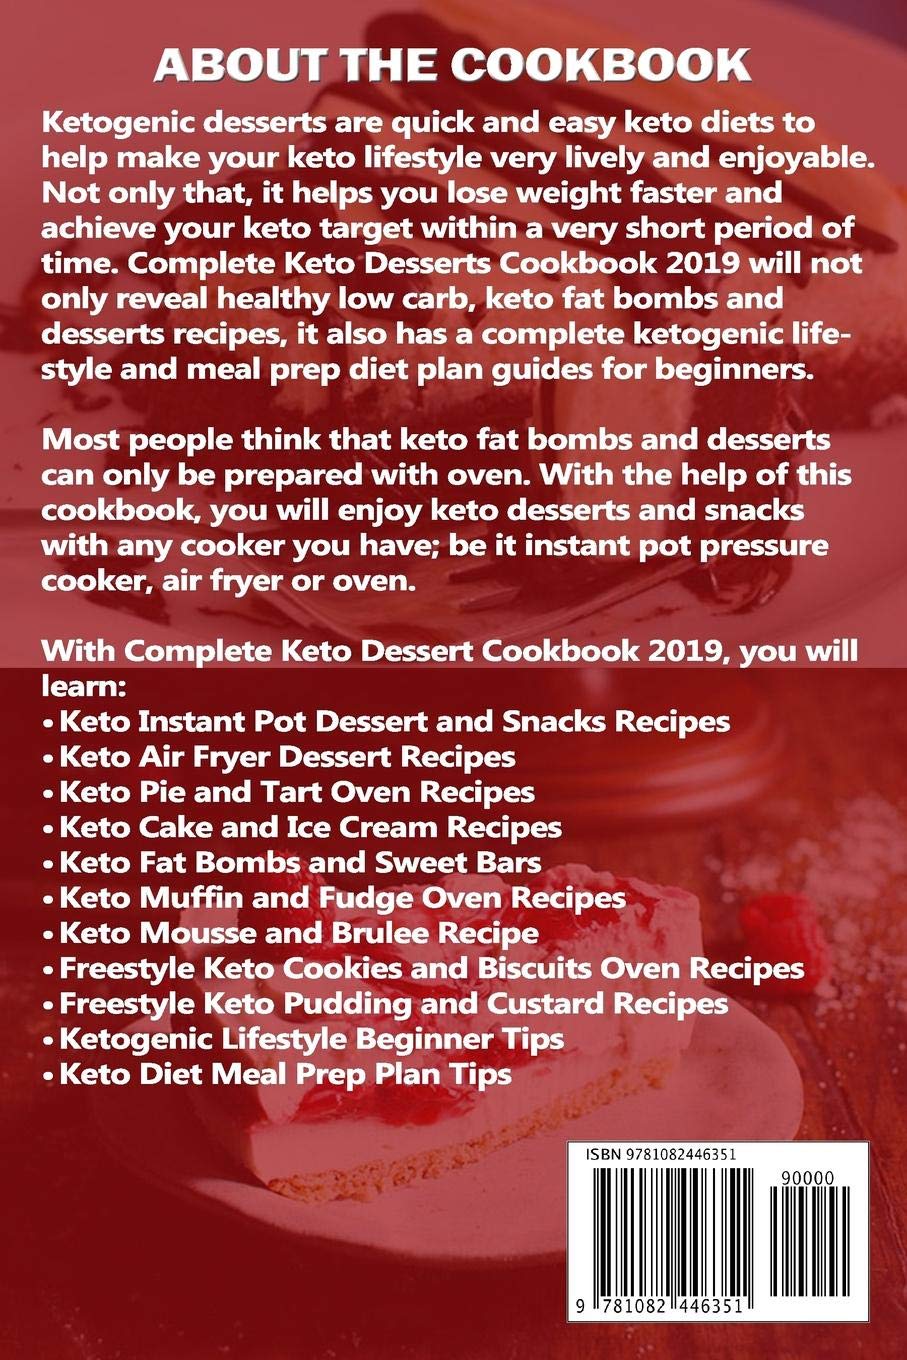 Complete Keto Desserts Cookbook 2019: Learn 500 New, Tasty, Ketogenic Fat Bombs, Snacks & Desserts, Low Carb Weight Loss Recipes for Oven Instant Pot & Air Fryer with Meal Prep Diet Plan Tips